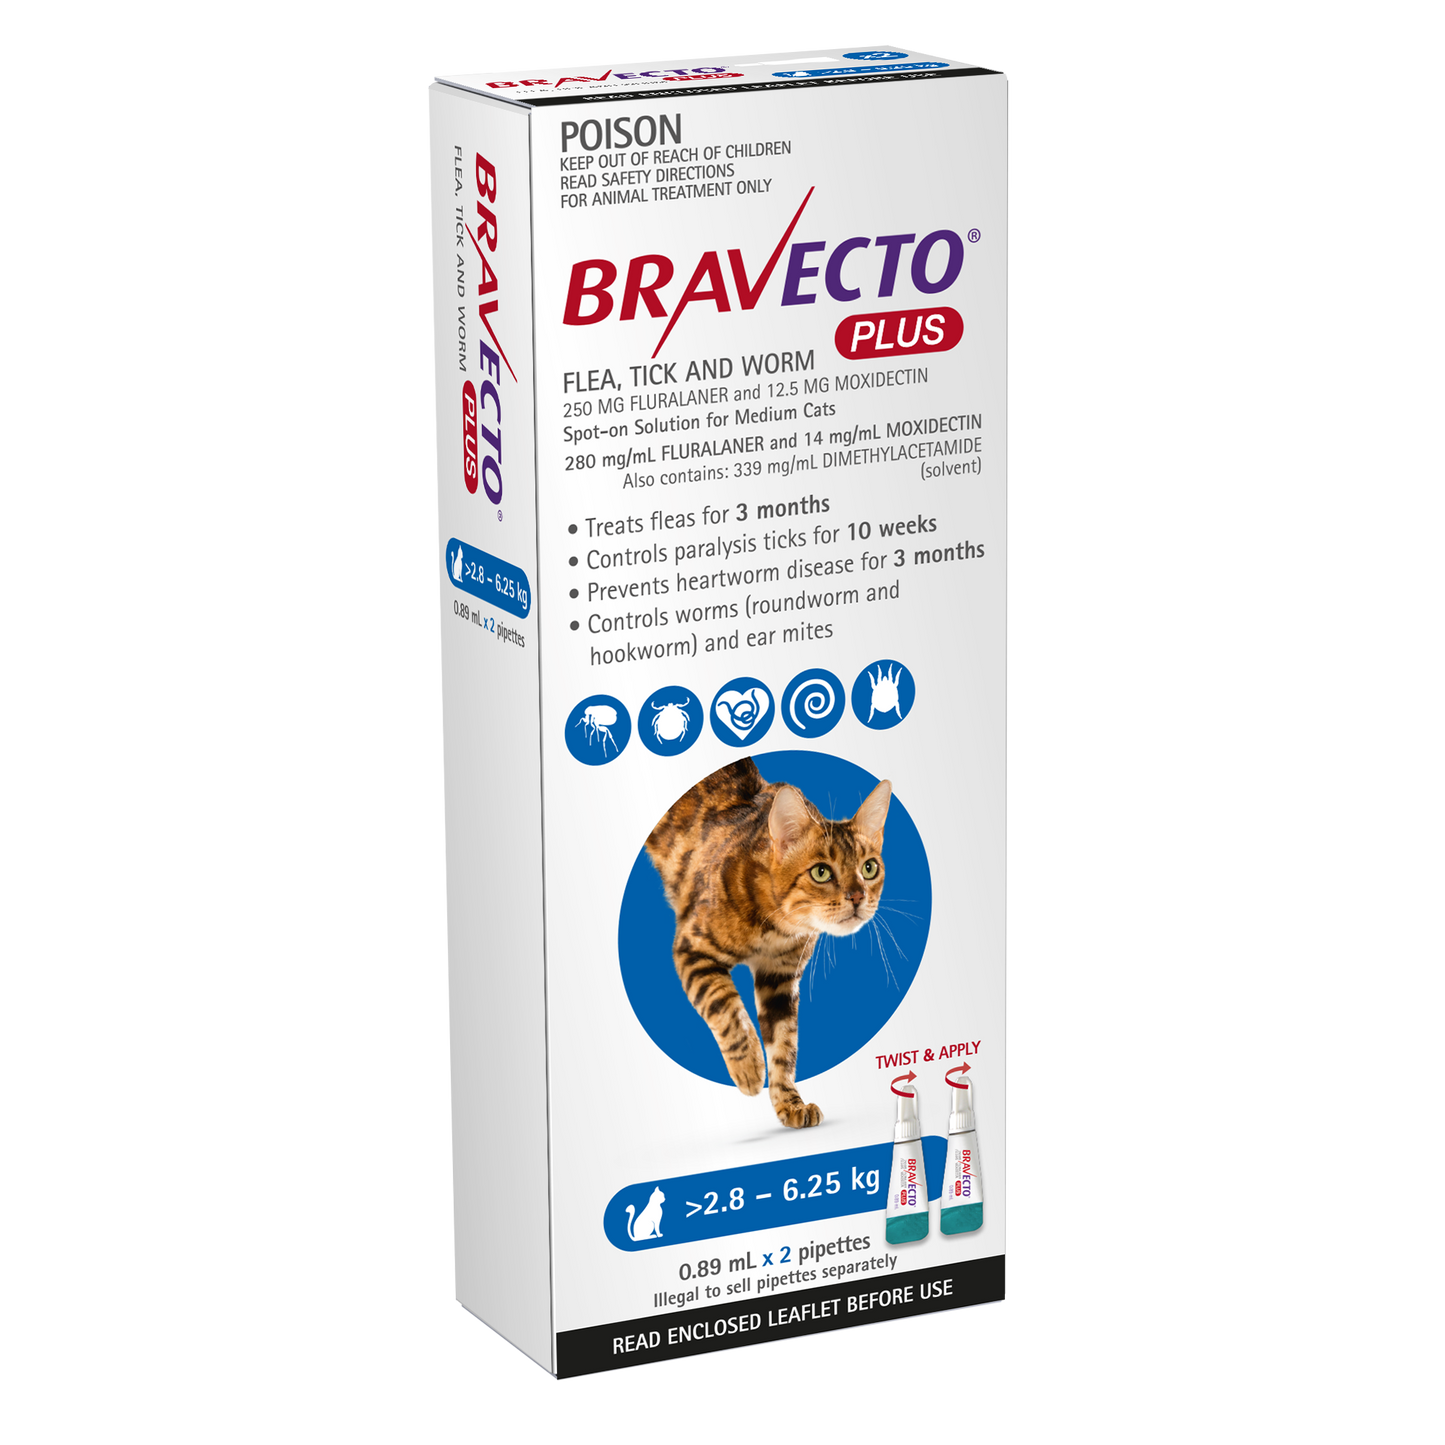 Bravecto Plus Spot-On for Cats, 6.2-13.8lbs (2.8-6.25kg)